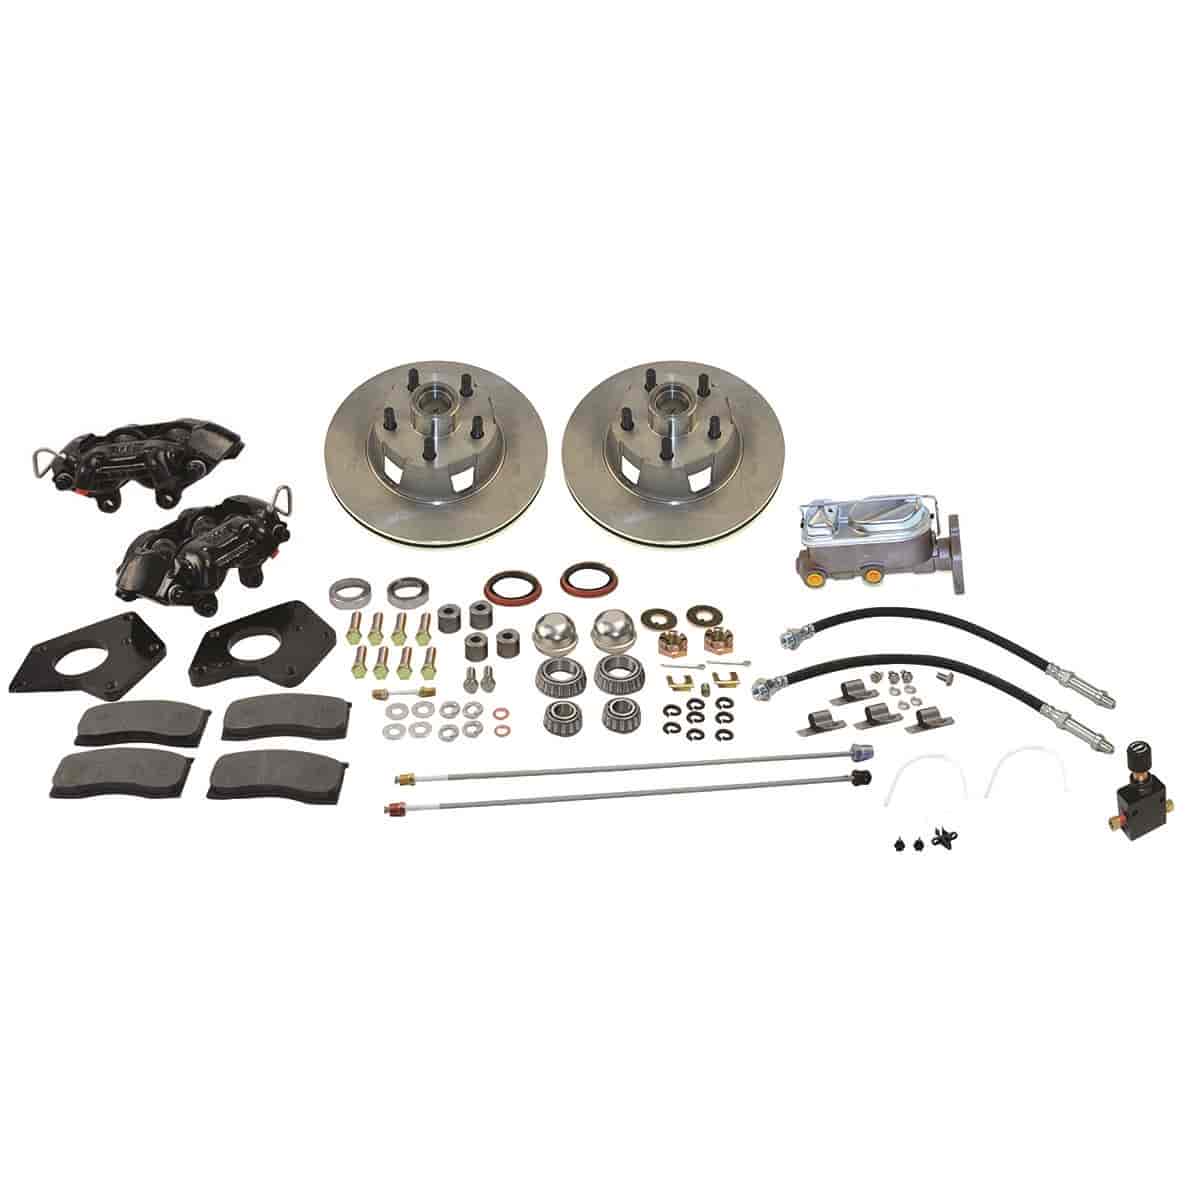 Front 4-Piston Drum to Disc Brake Conversion Kit See More Details For Applications